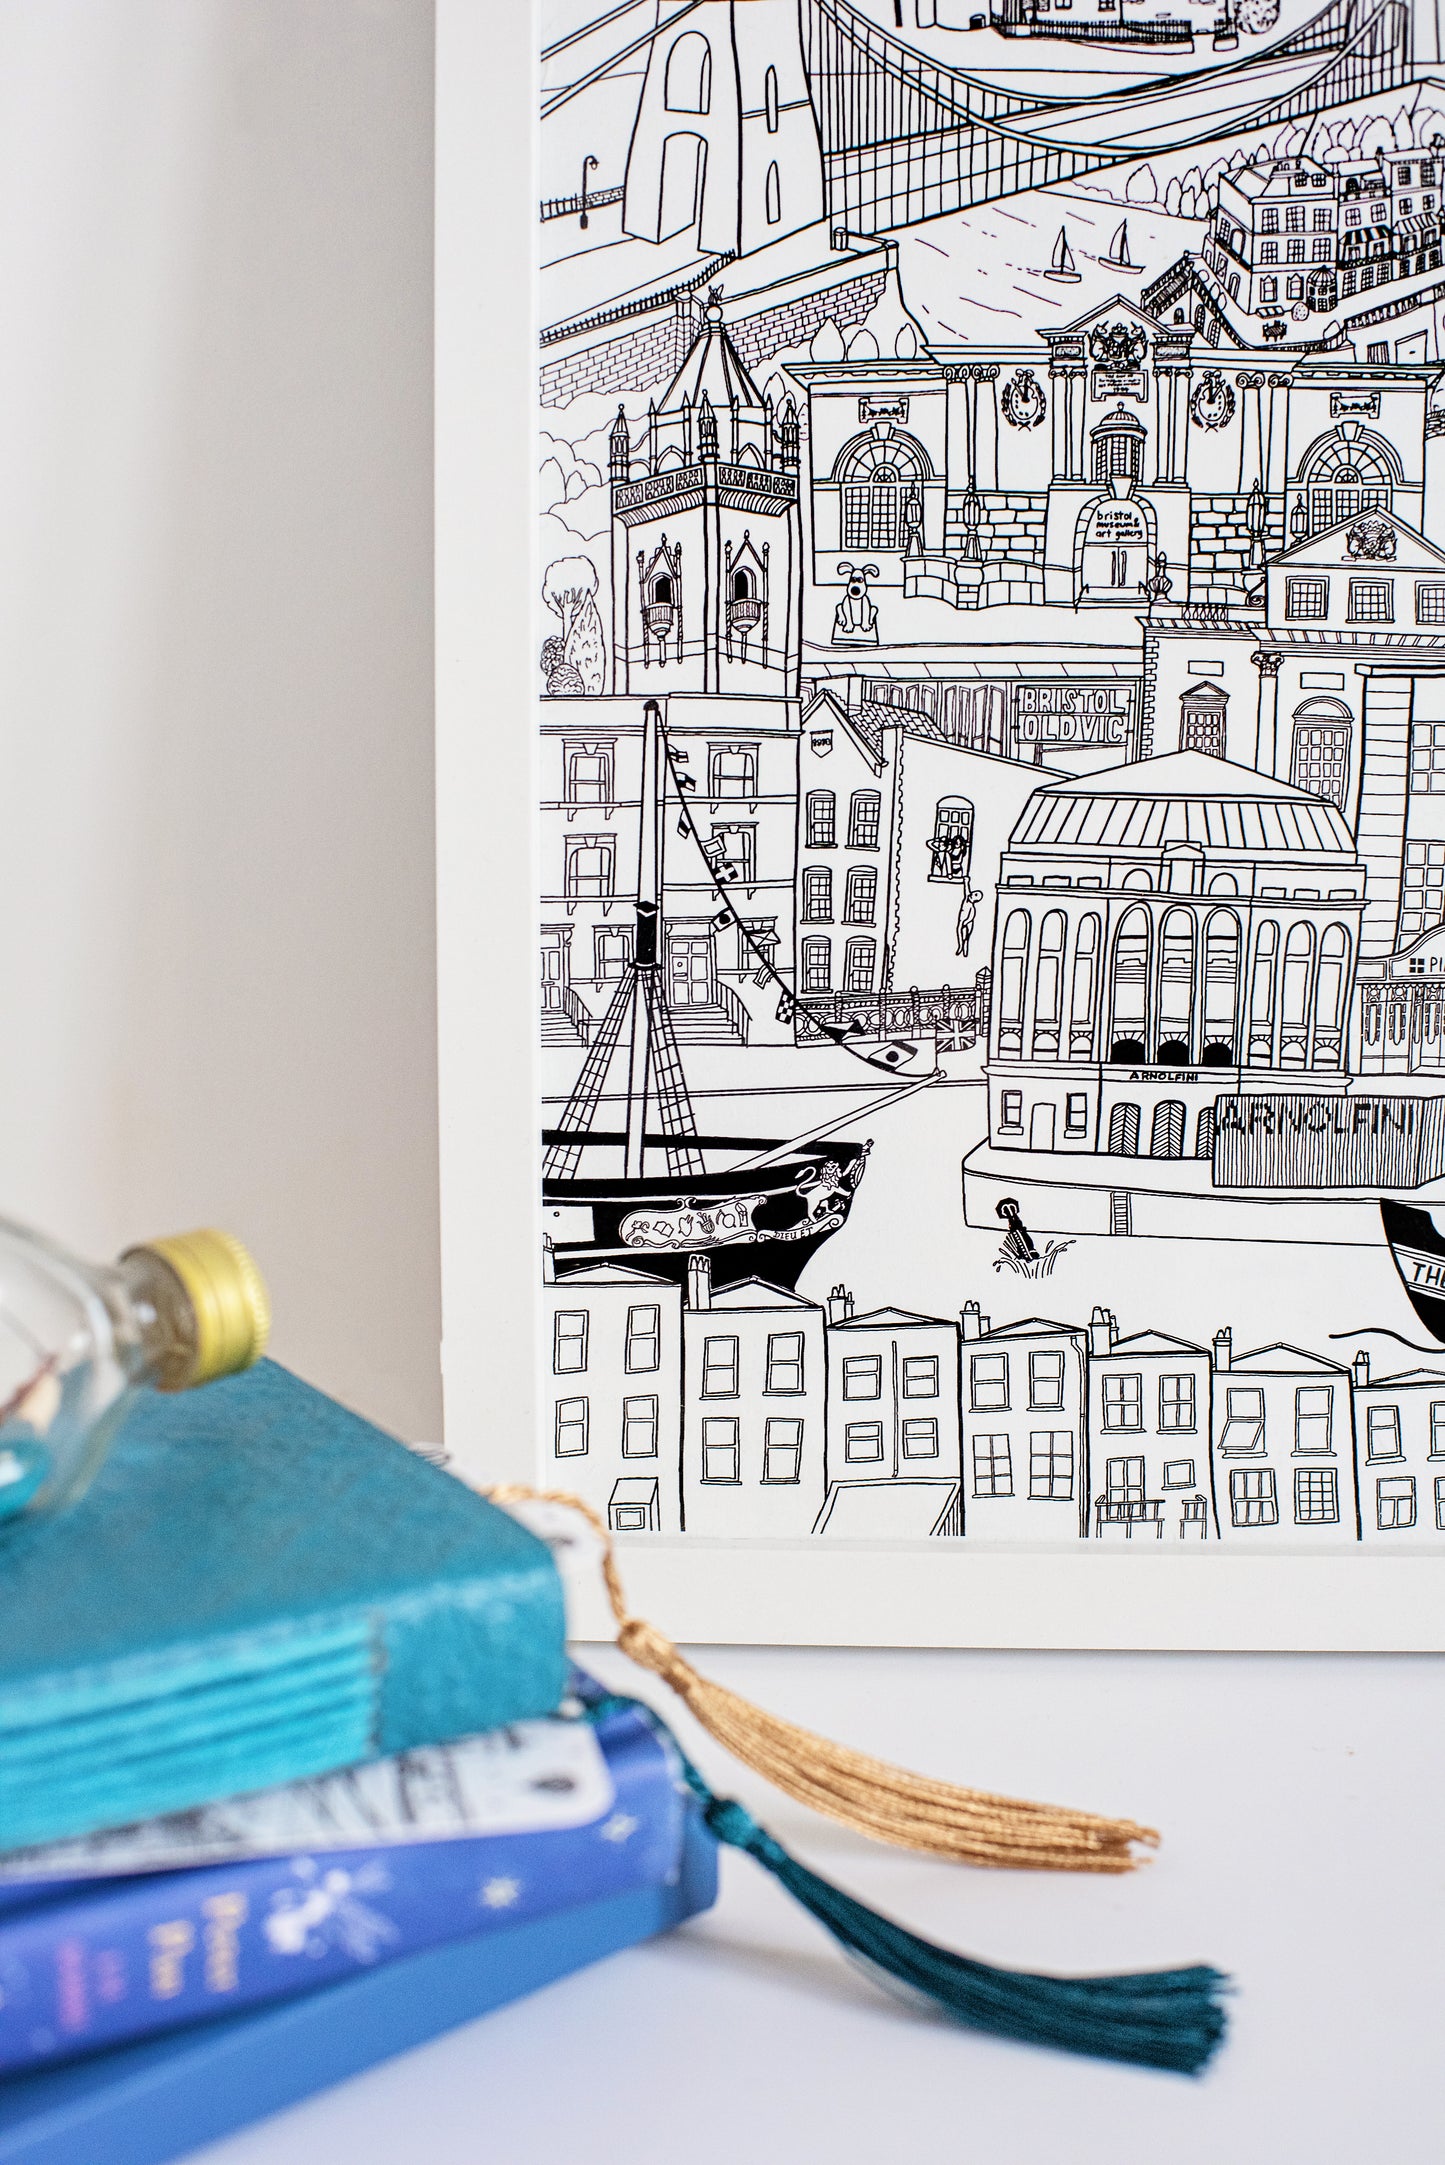 A closer look at the left side of the Bristol art print, showing further details on the streets and walls of Bristol.